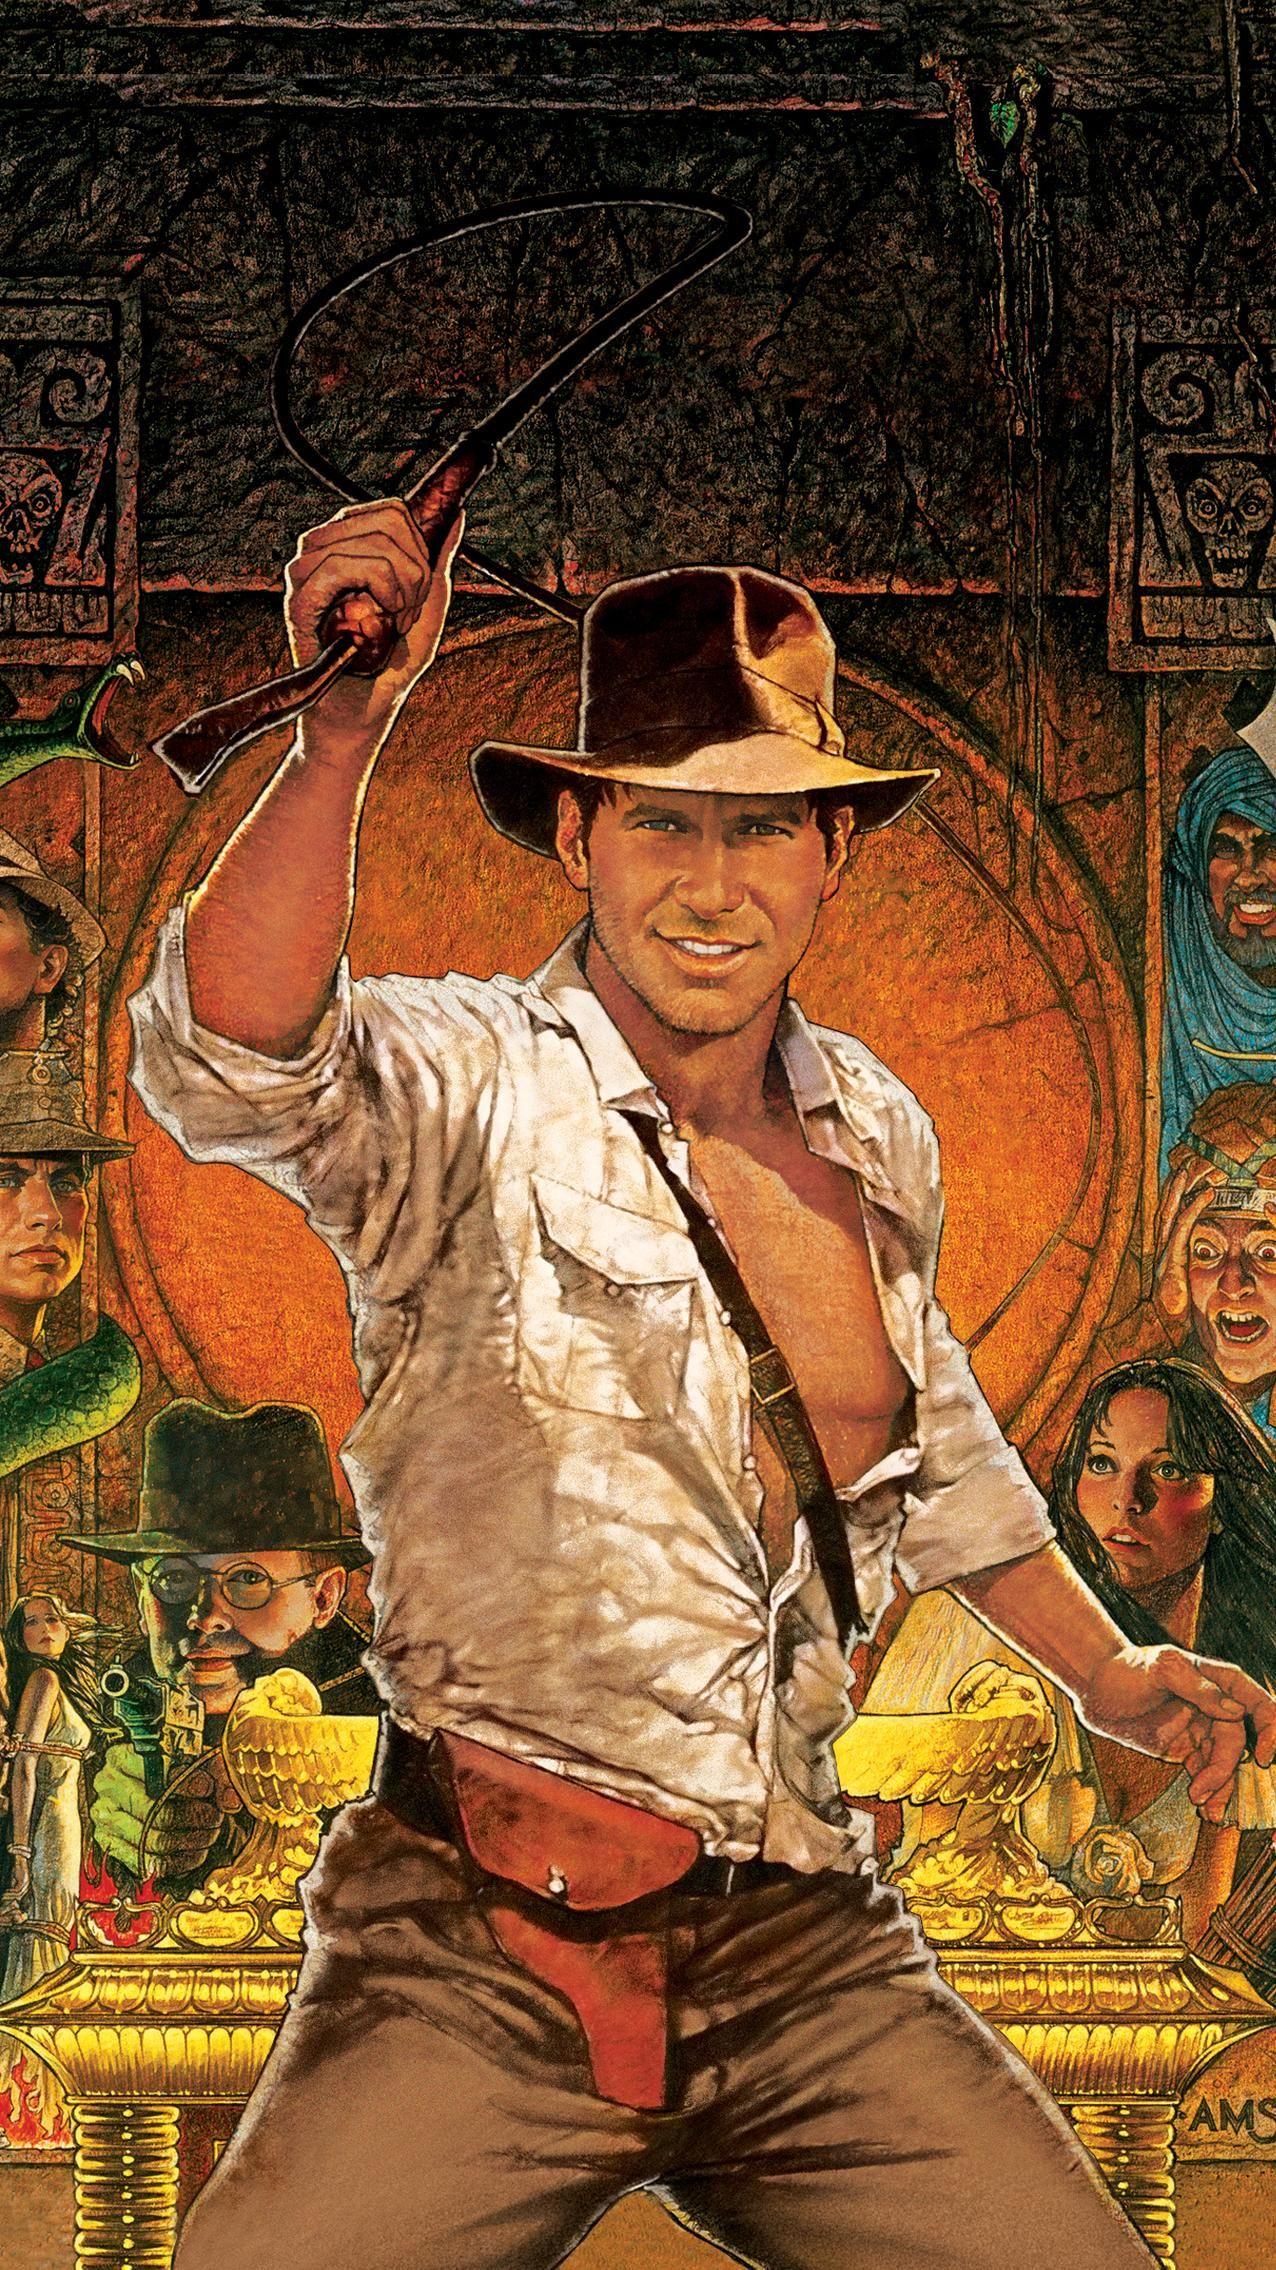 Raiders of the Lost Ark (1981) Phone Wallpaper. Indiana